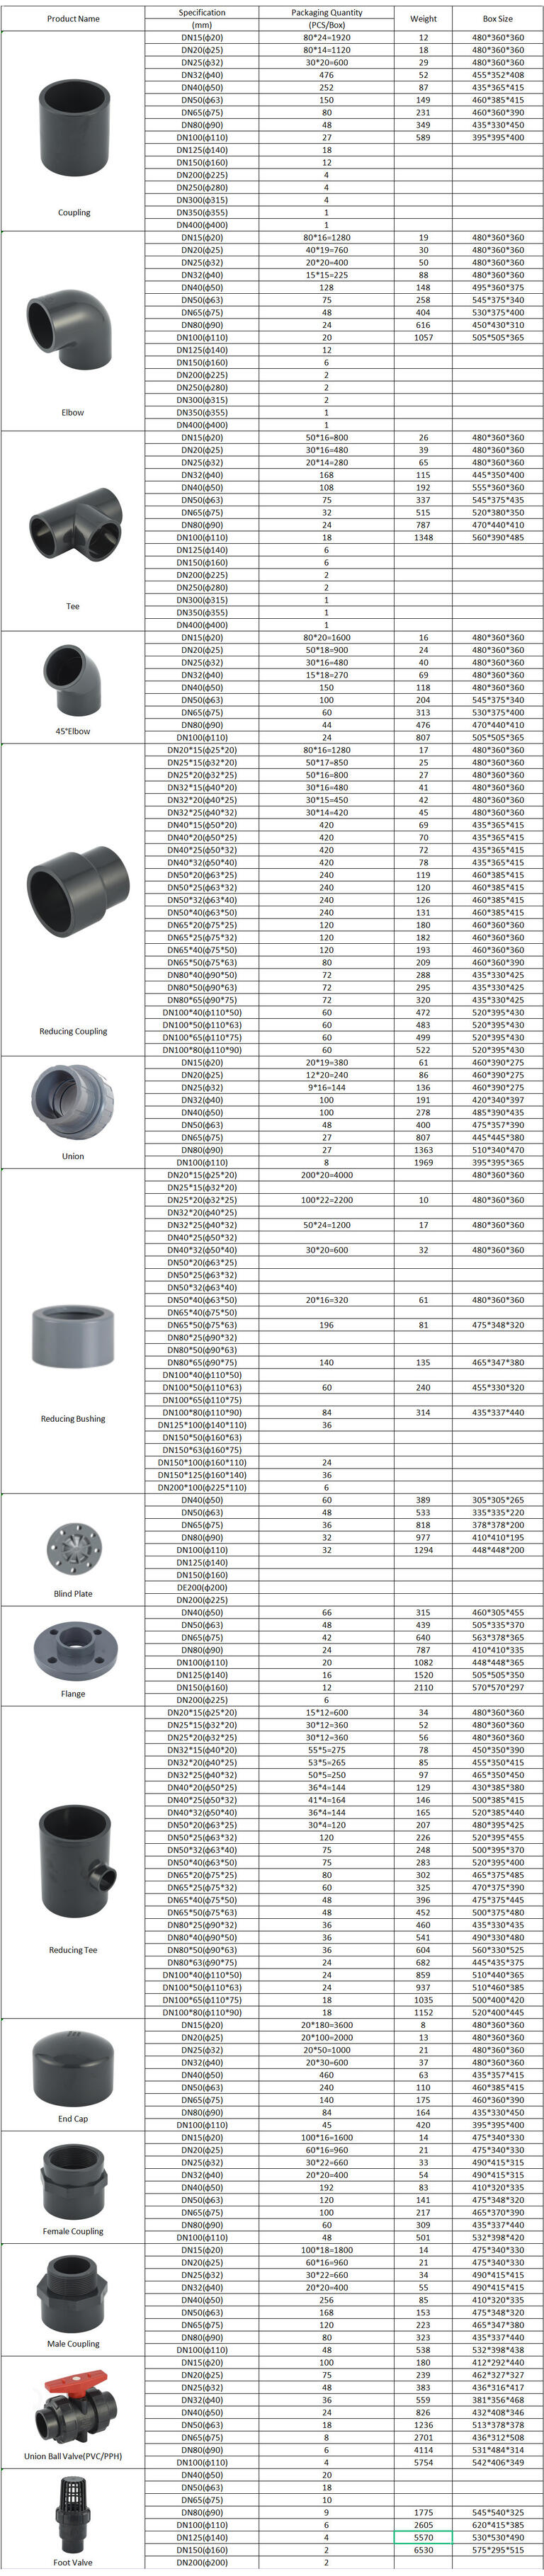 This picture shows the NBQXHY UPVC DIN pipe fittings specification